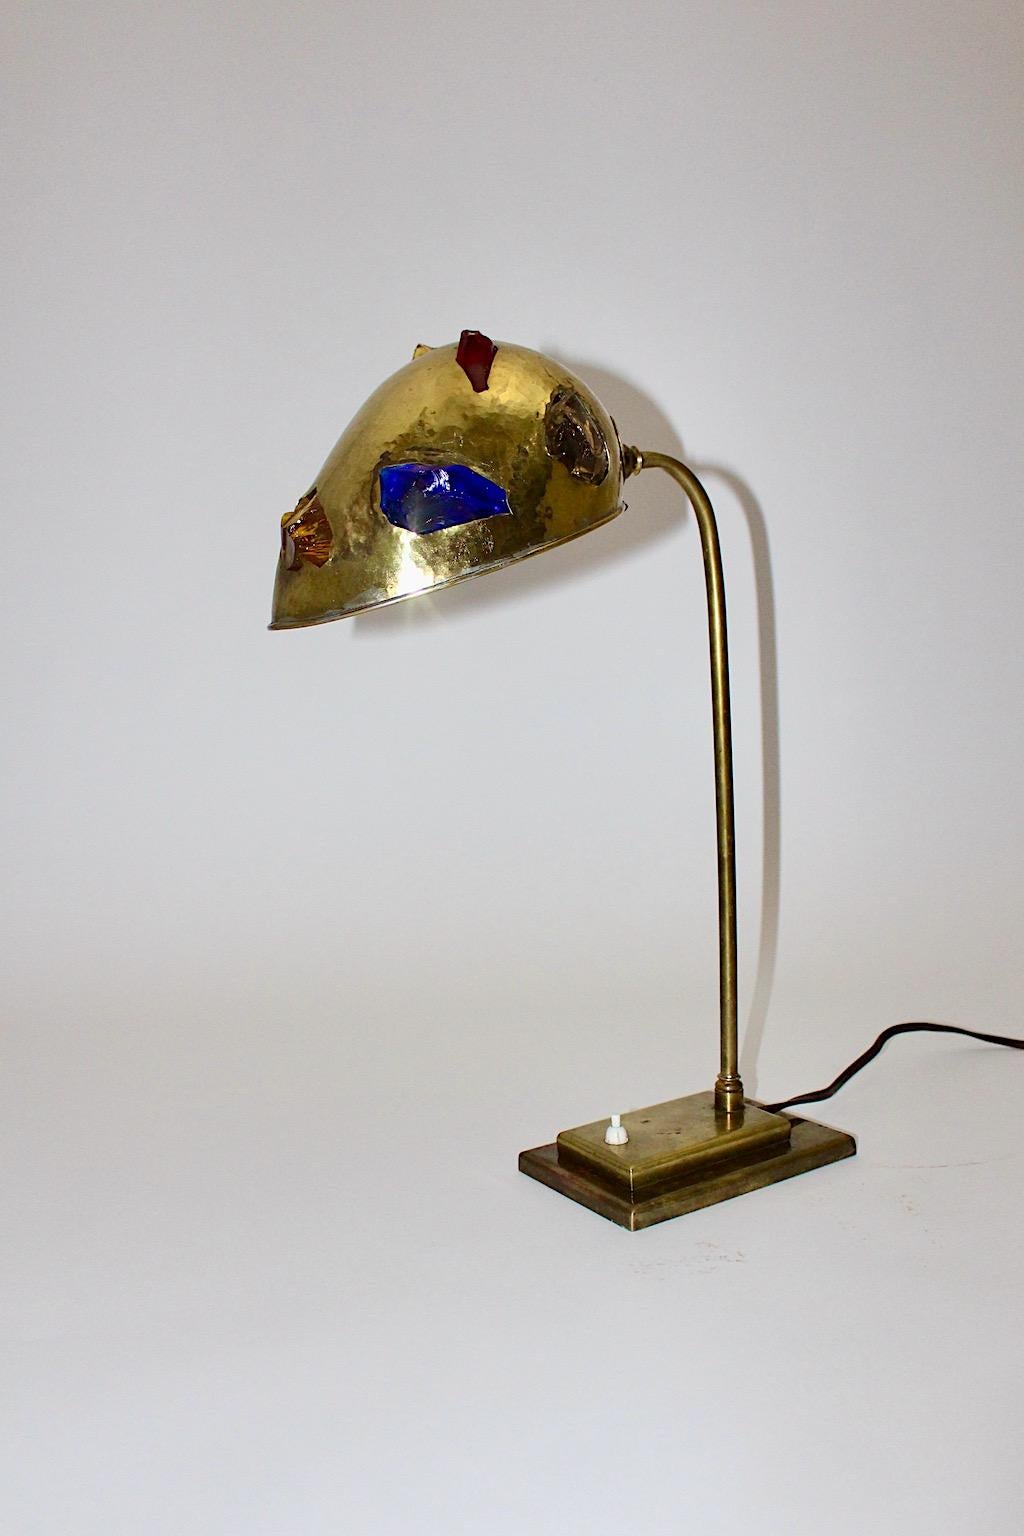 20th Century Mid-Century Modern Brass Table Lamp 1950s Austria Multicolored Glass Stones For Sale